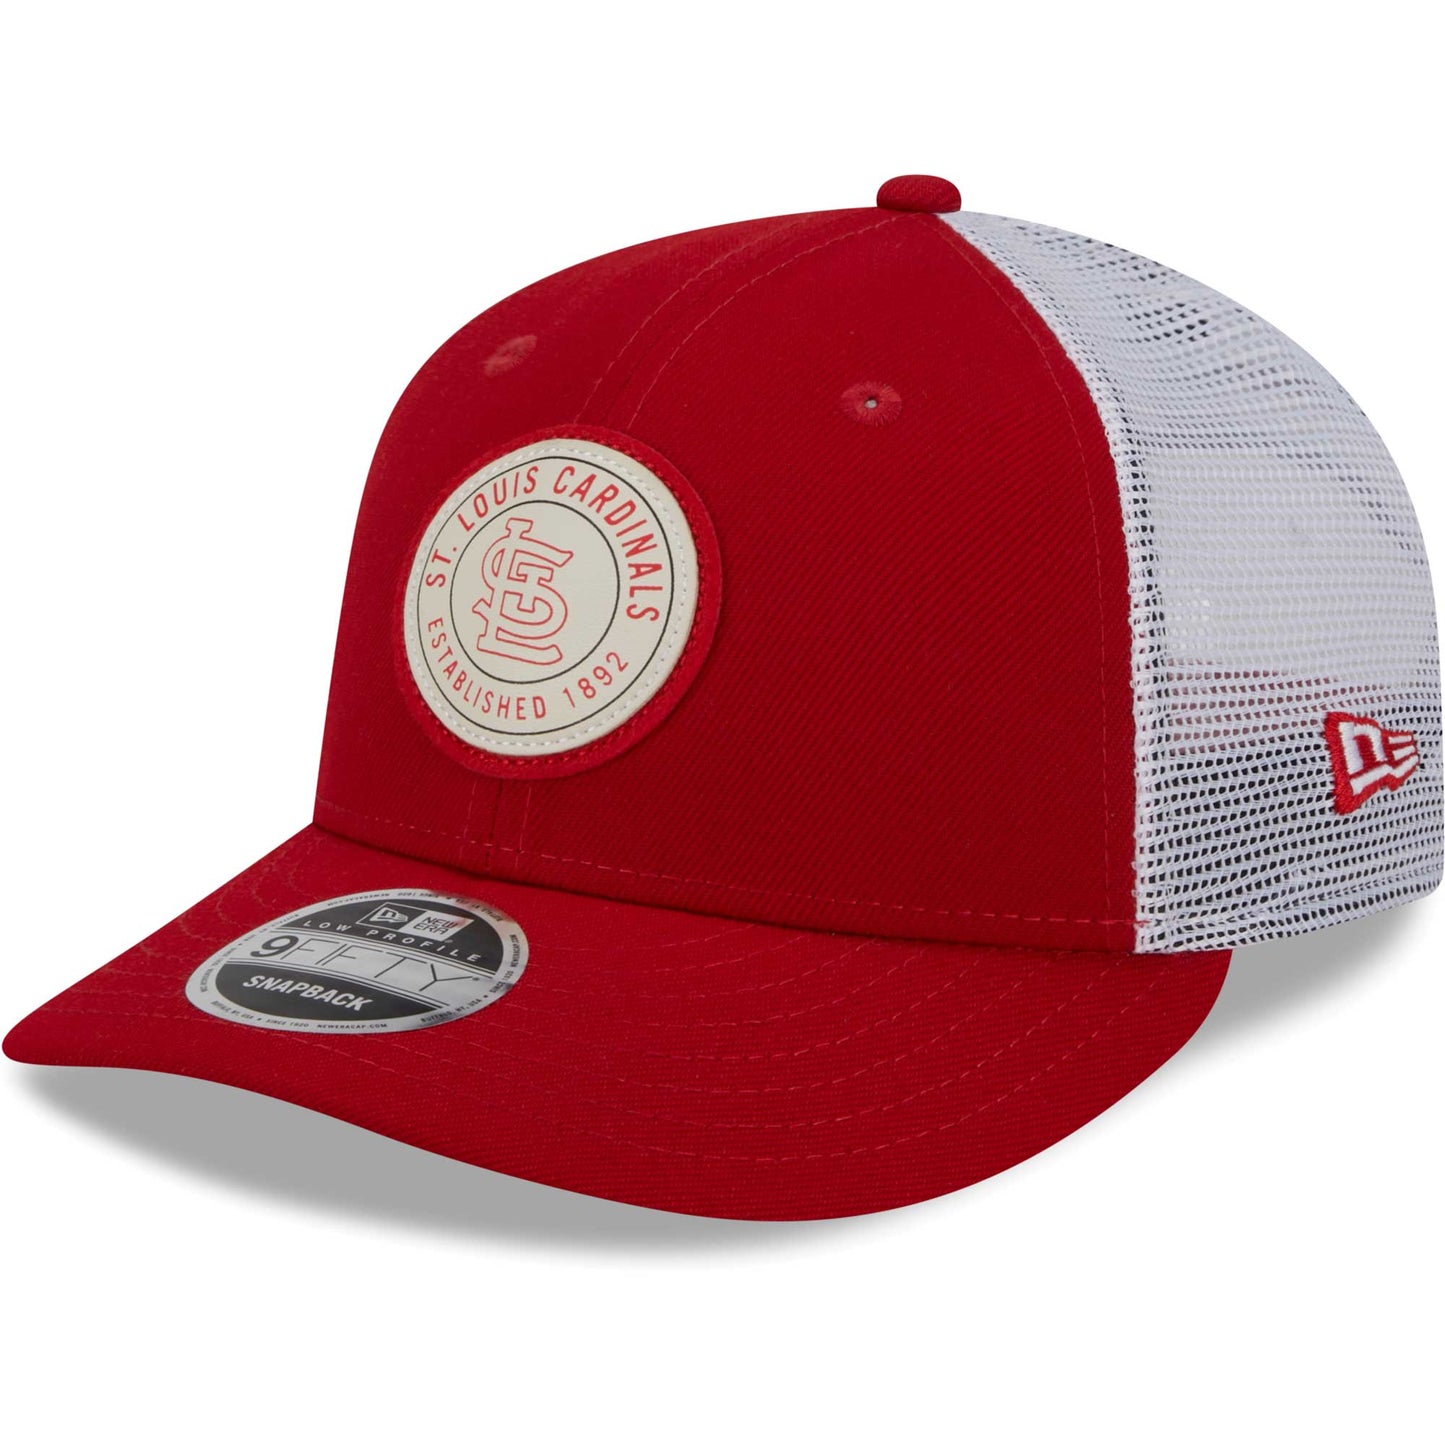 St. Louis Cardinals New Era Circle Trucker Low Profile 9FIFTY Snapback Hat - Red